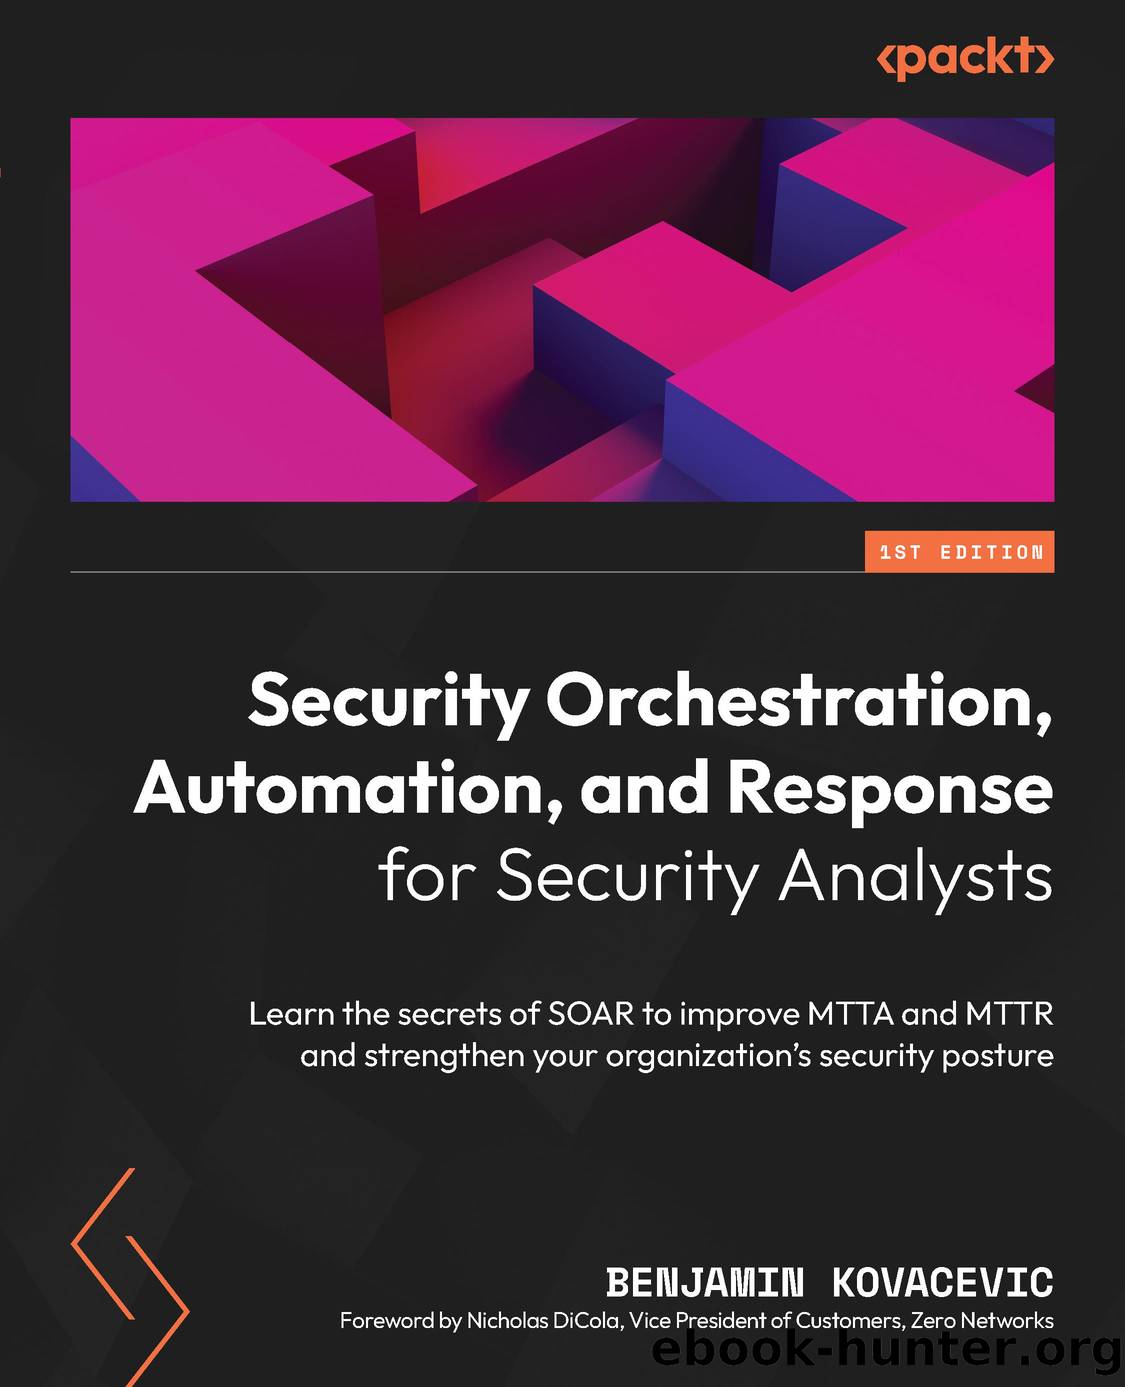 Security Orchestration, Automation, and Response for Security Analysts by Benjamin Kovacevic